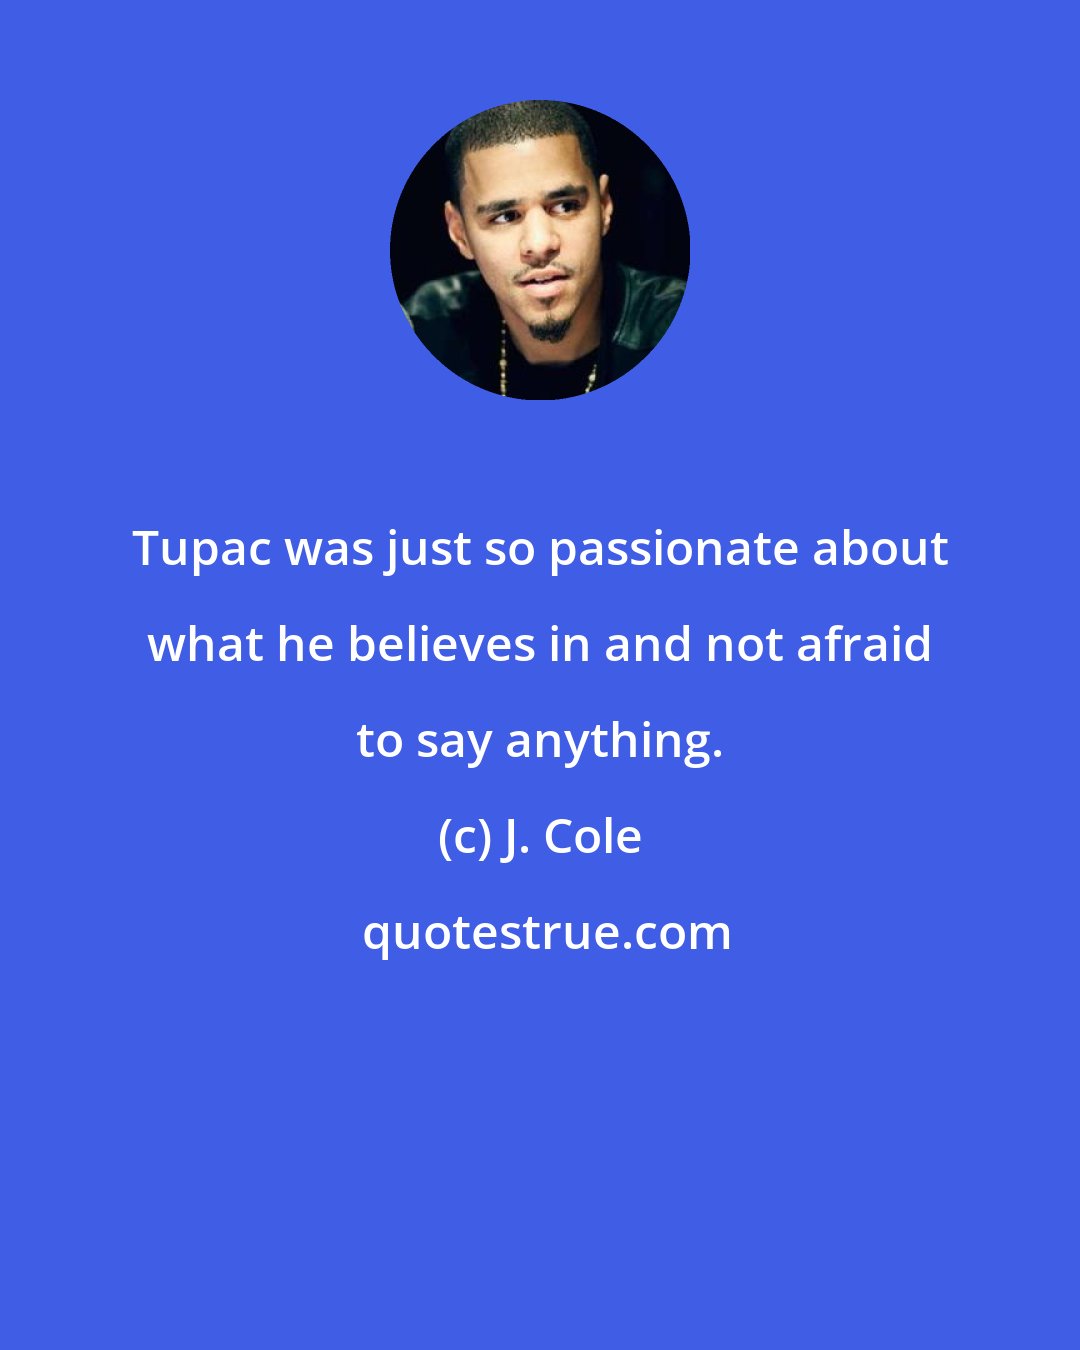 J. Cole: Tupac was just so passionate about what he believes in and not afraid to say anything.